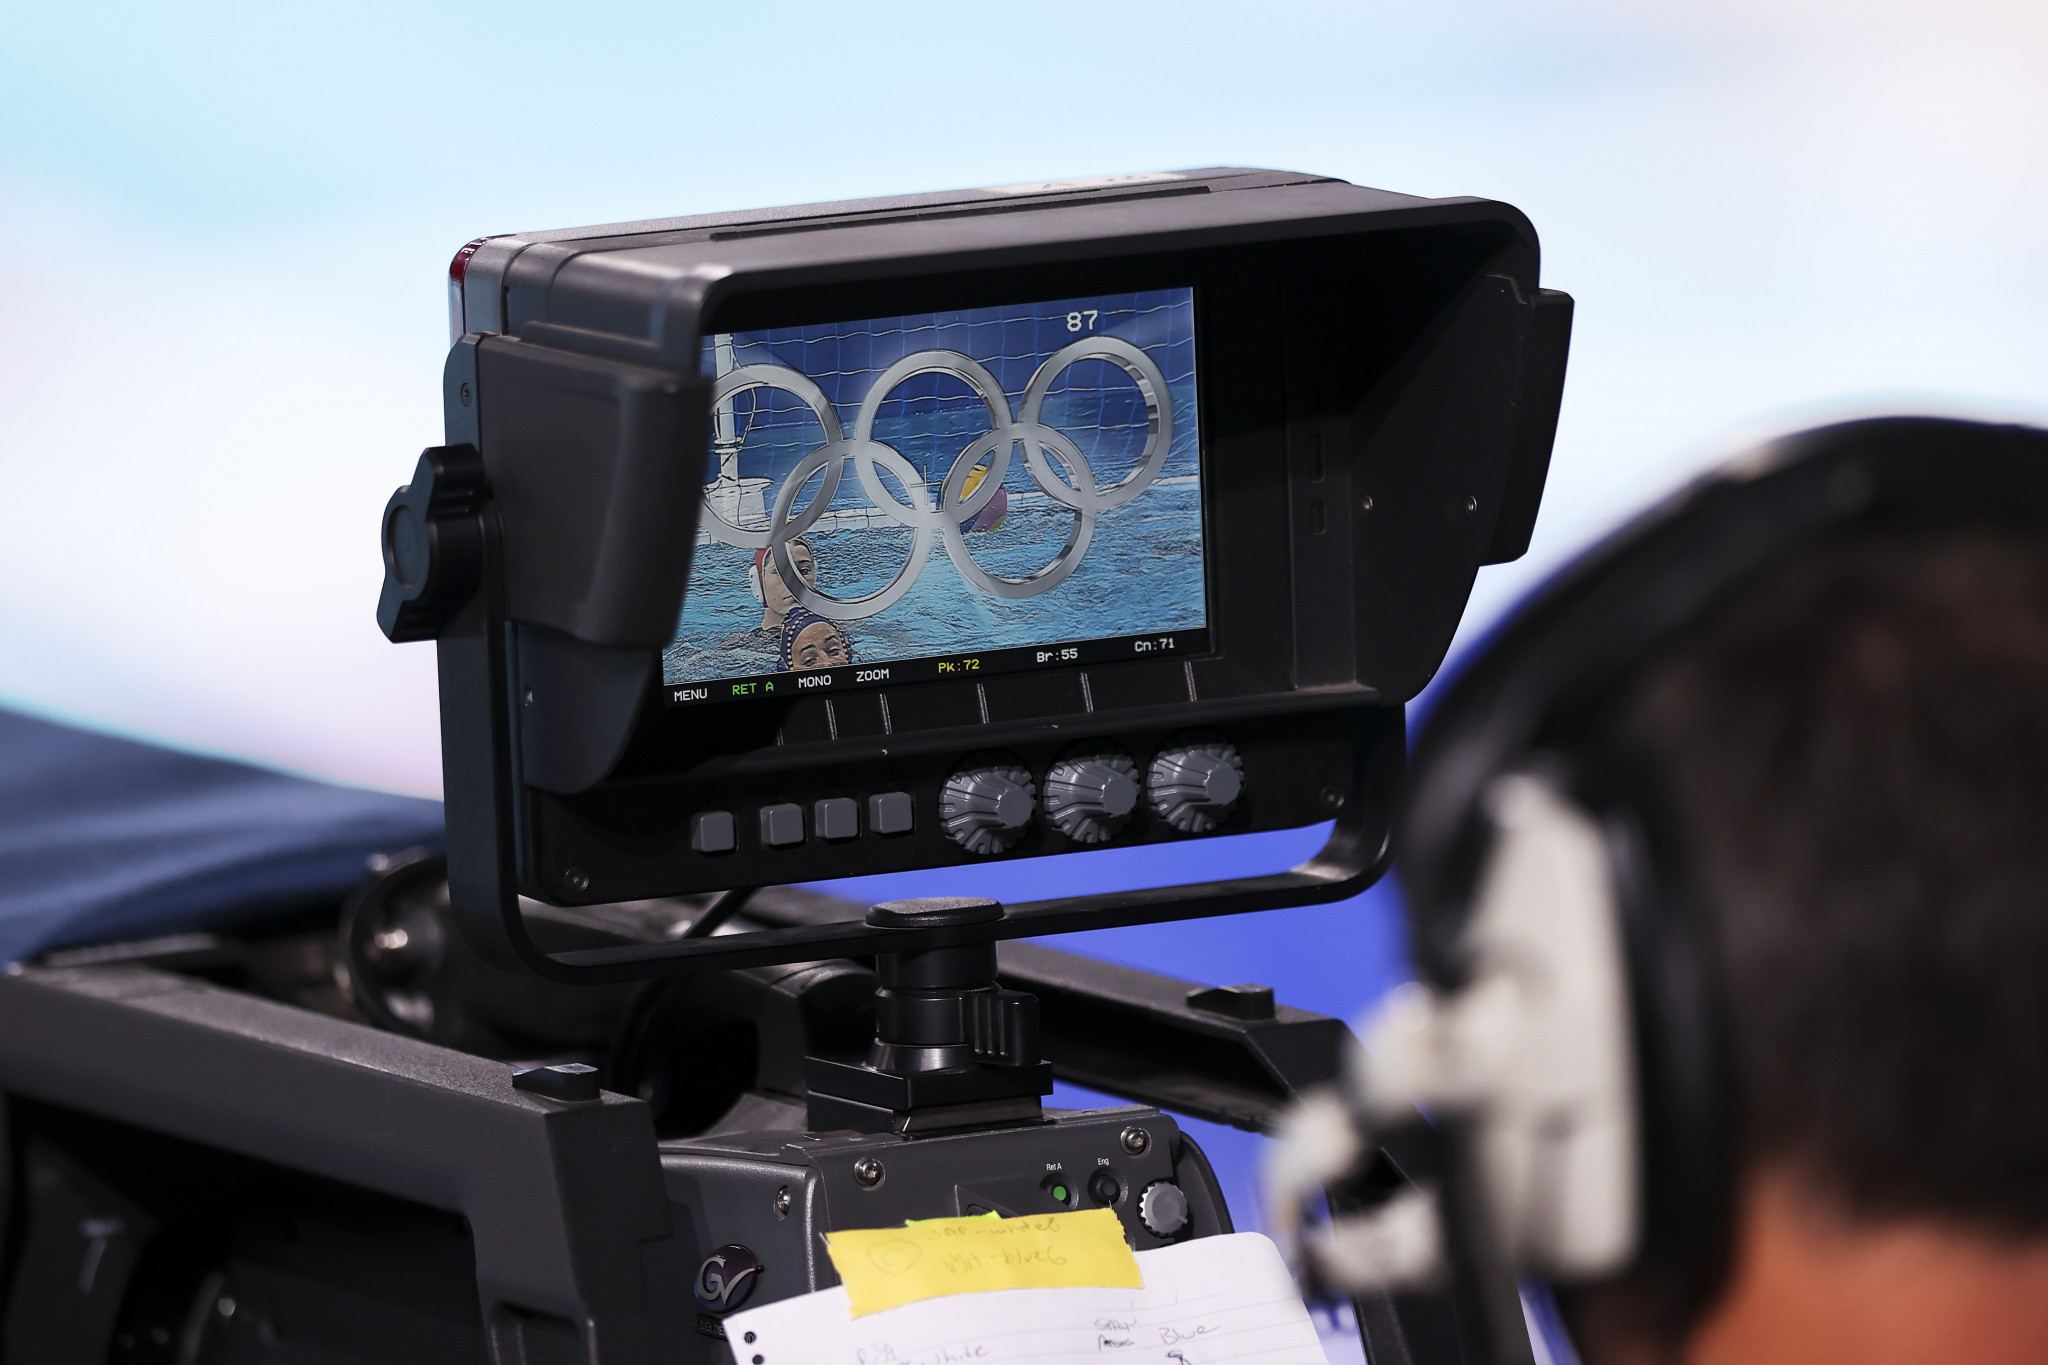 CCTV will remain he Olympic broadcaster in China until Brisbane 2032 under the terms of the latest agreement ©Getty Images